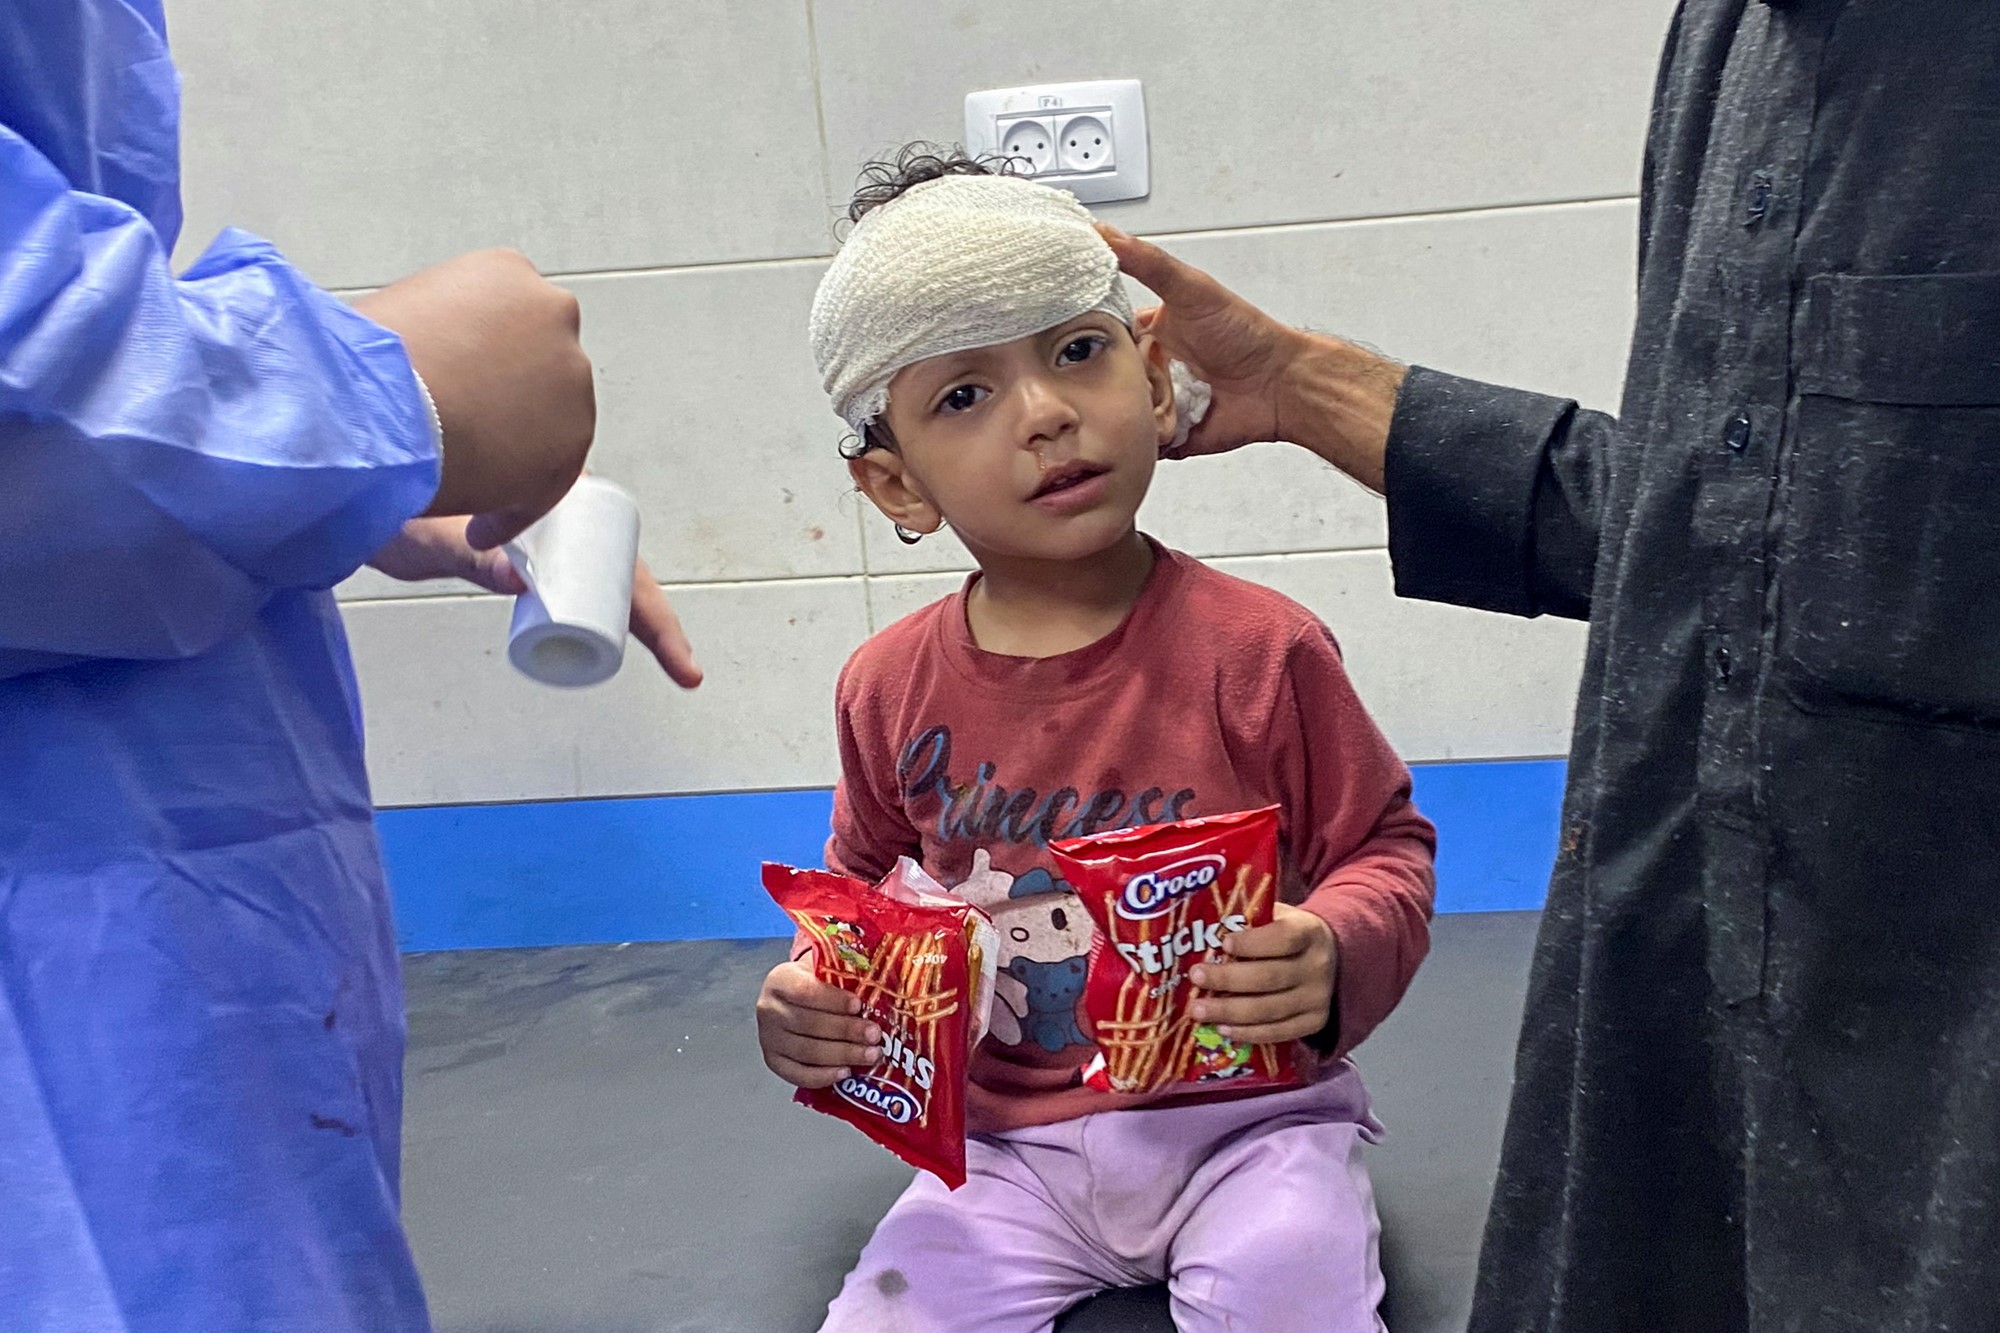 Image of a little girl, in her hands are two bags of pretzel sticks, she has a bandage around her head.